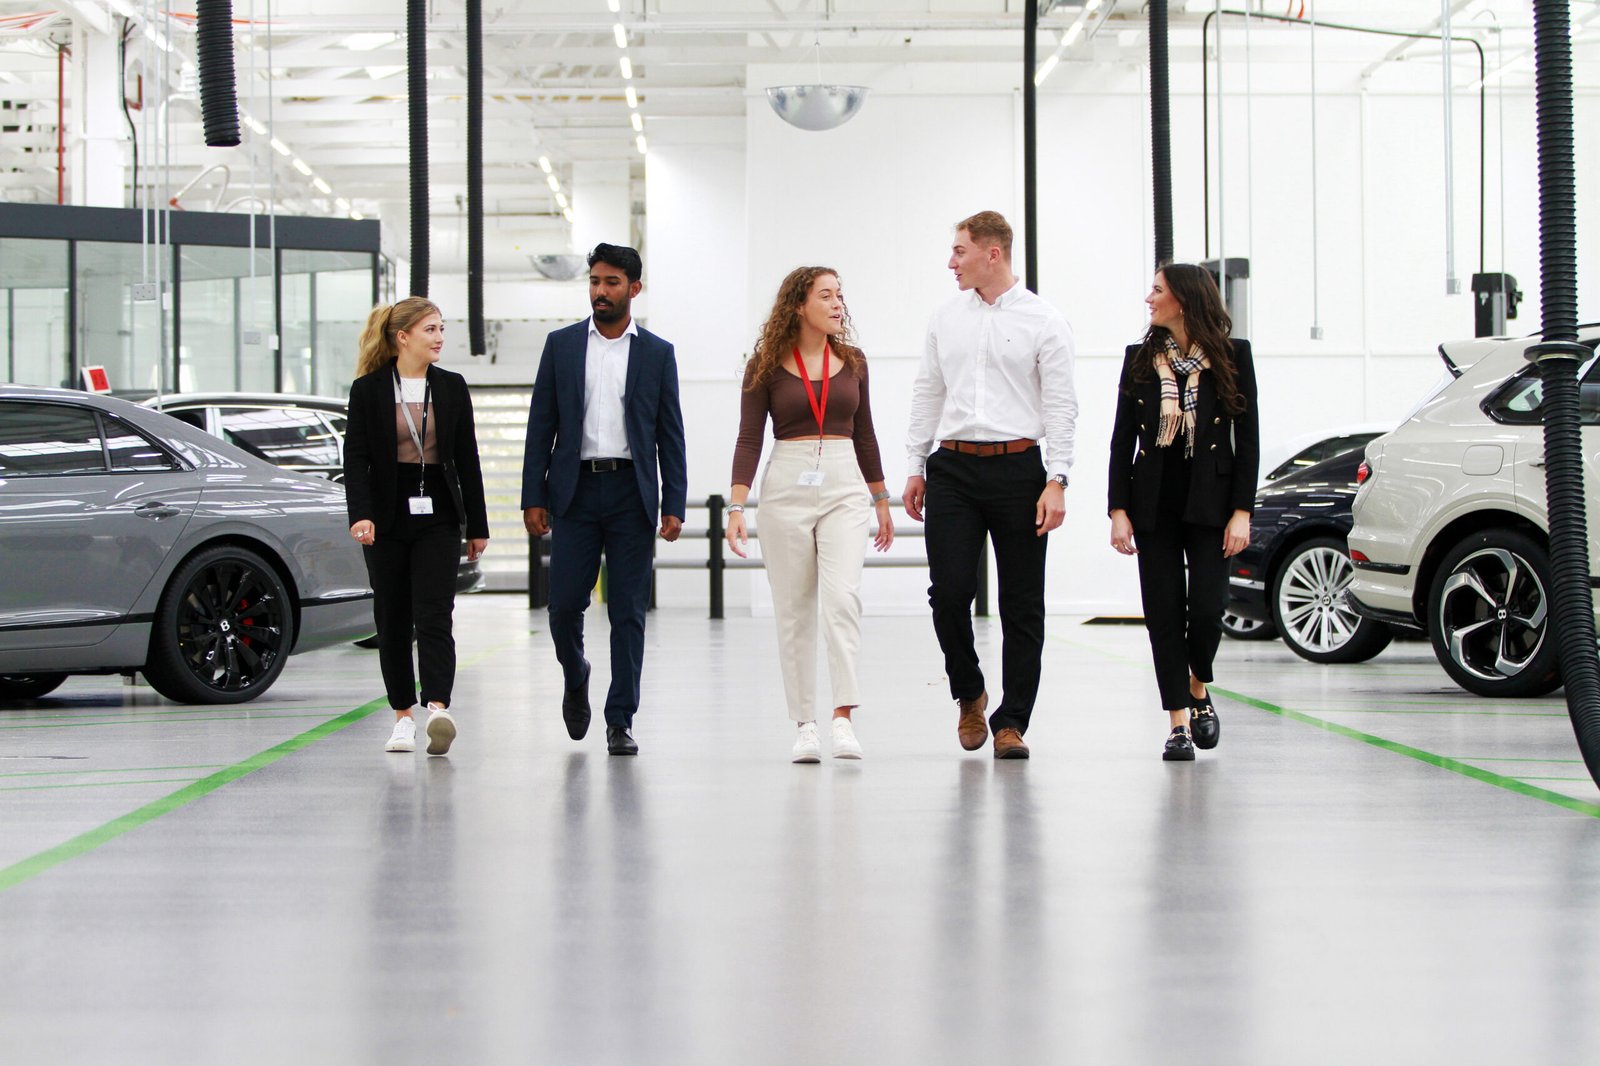 BENTLEY LAUNCHES TRAINEE RECRUITMENT DRIVE FOR  INDUSTRY’S BRIGHTEST TALENT